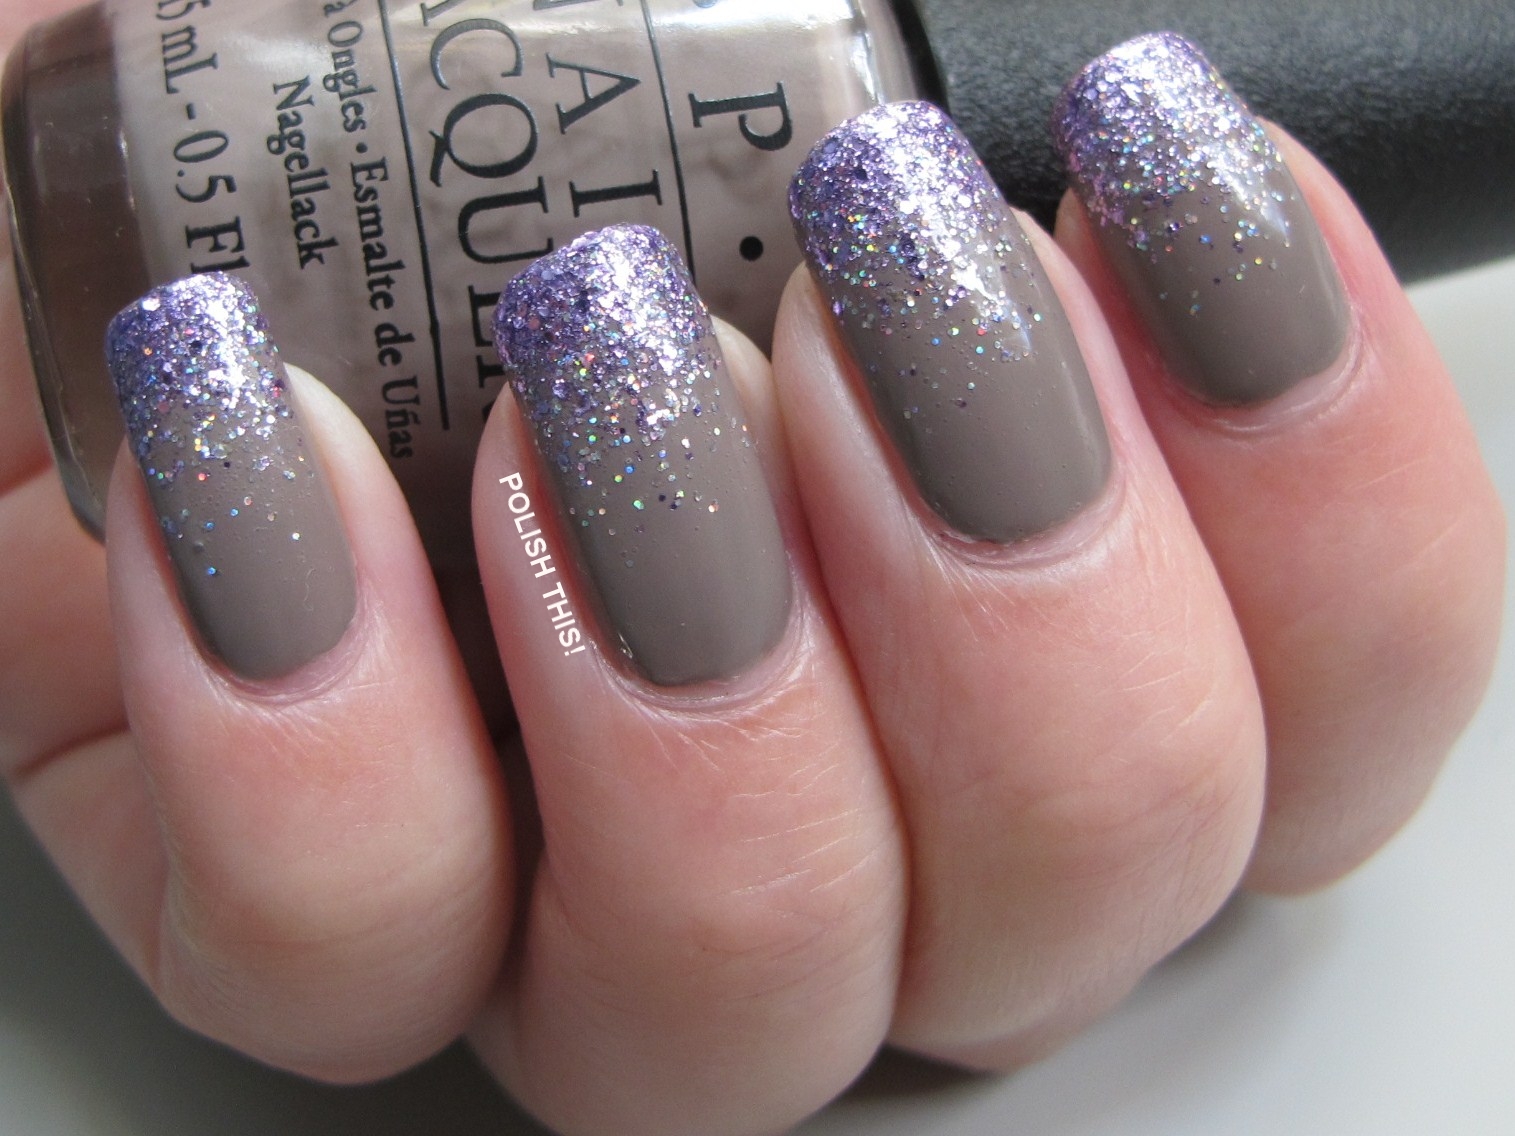 OPI Nail Lacquer, Berlin There Done That - wide 7